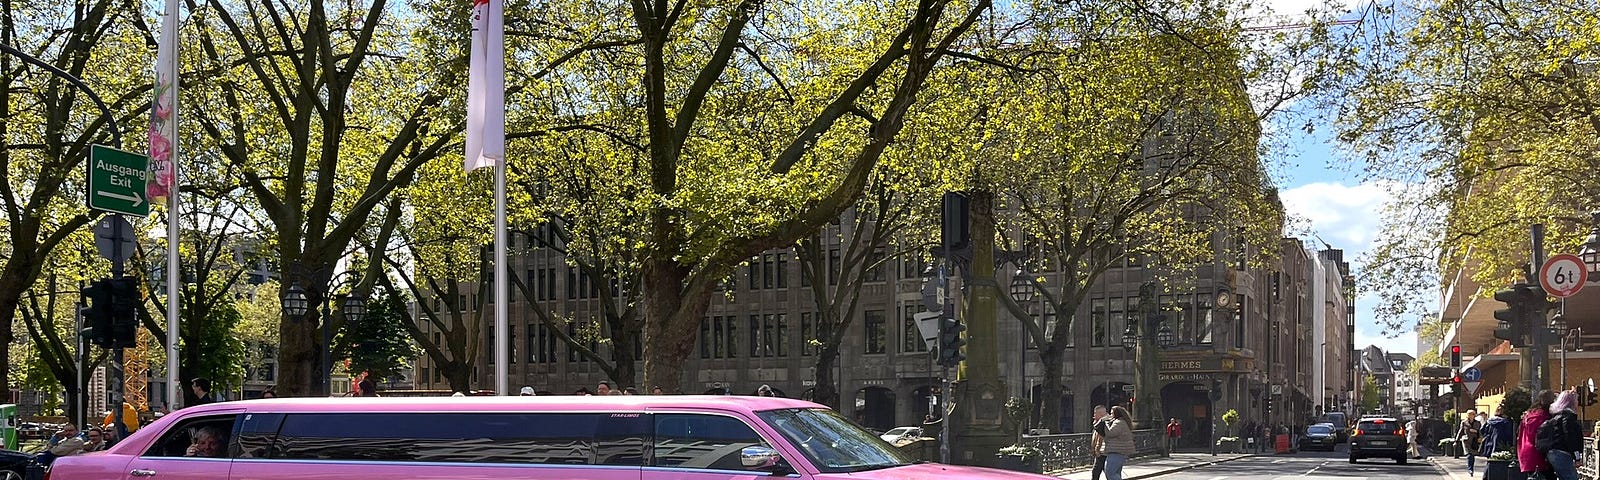 A bright pink limousine about to go across an intersection on an urban street with trees in the background on a sunny day.